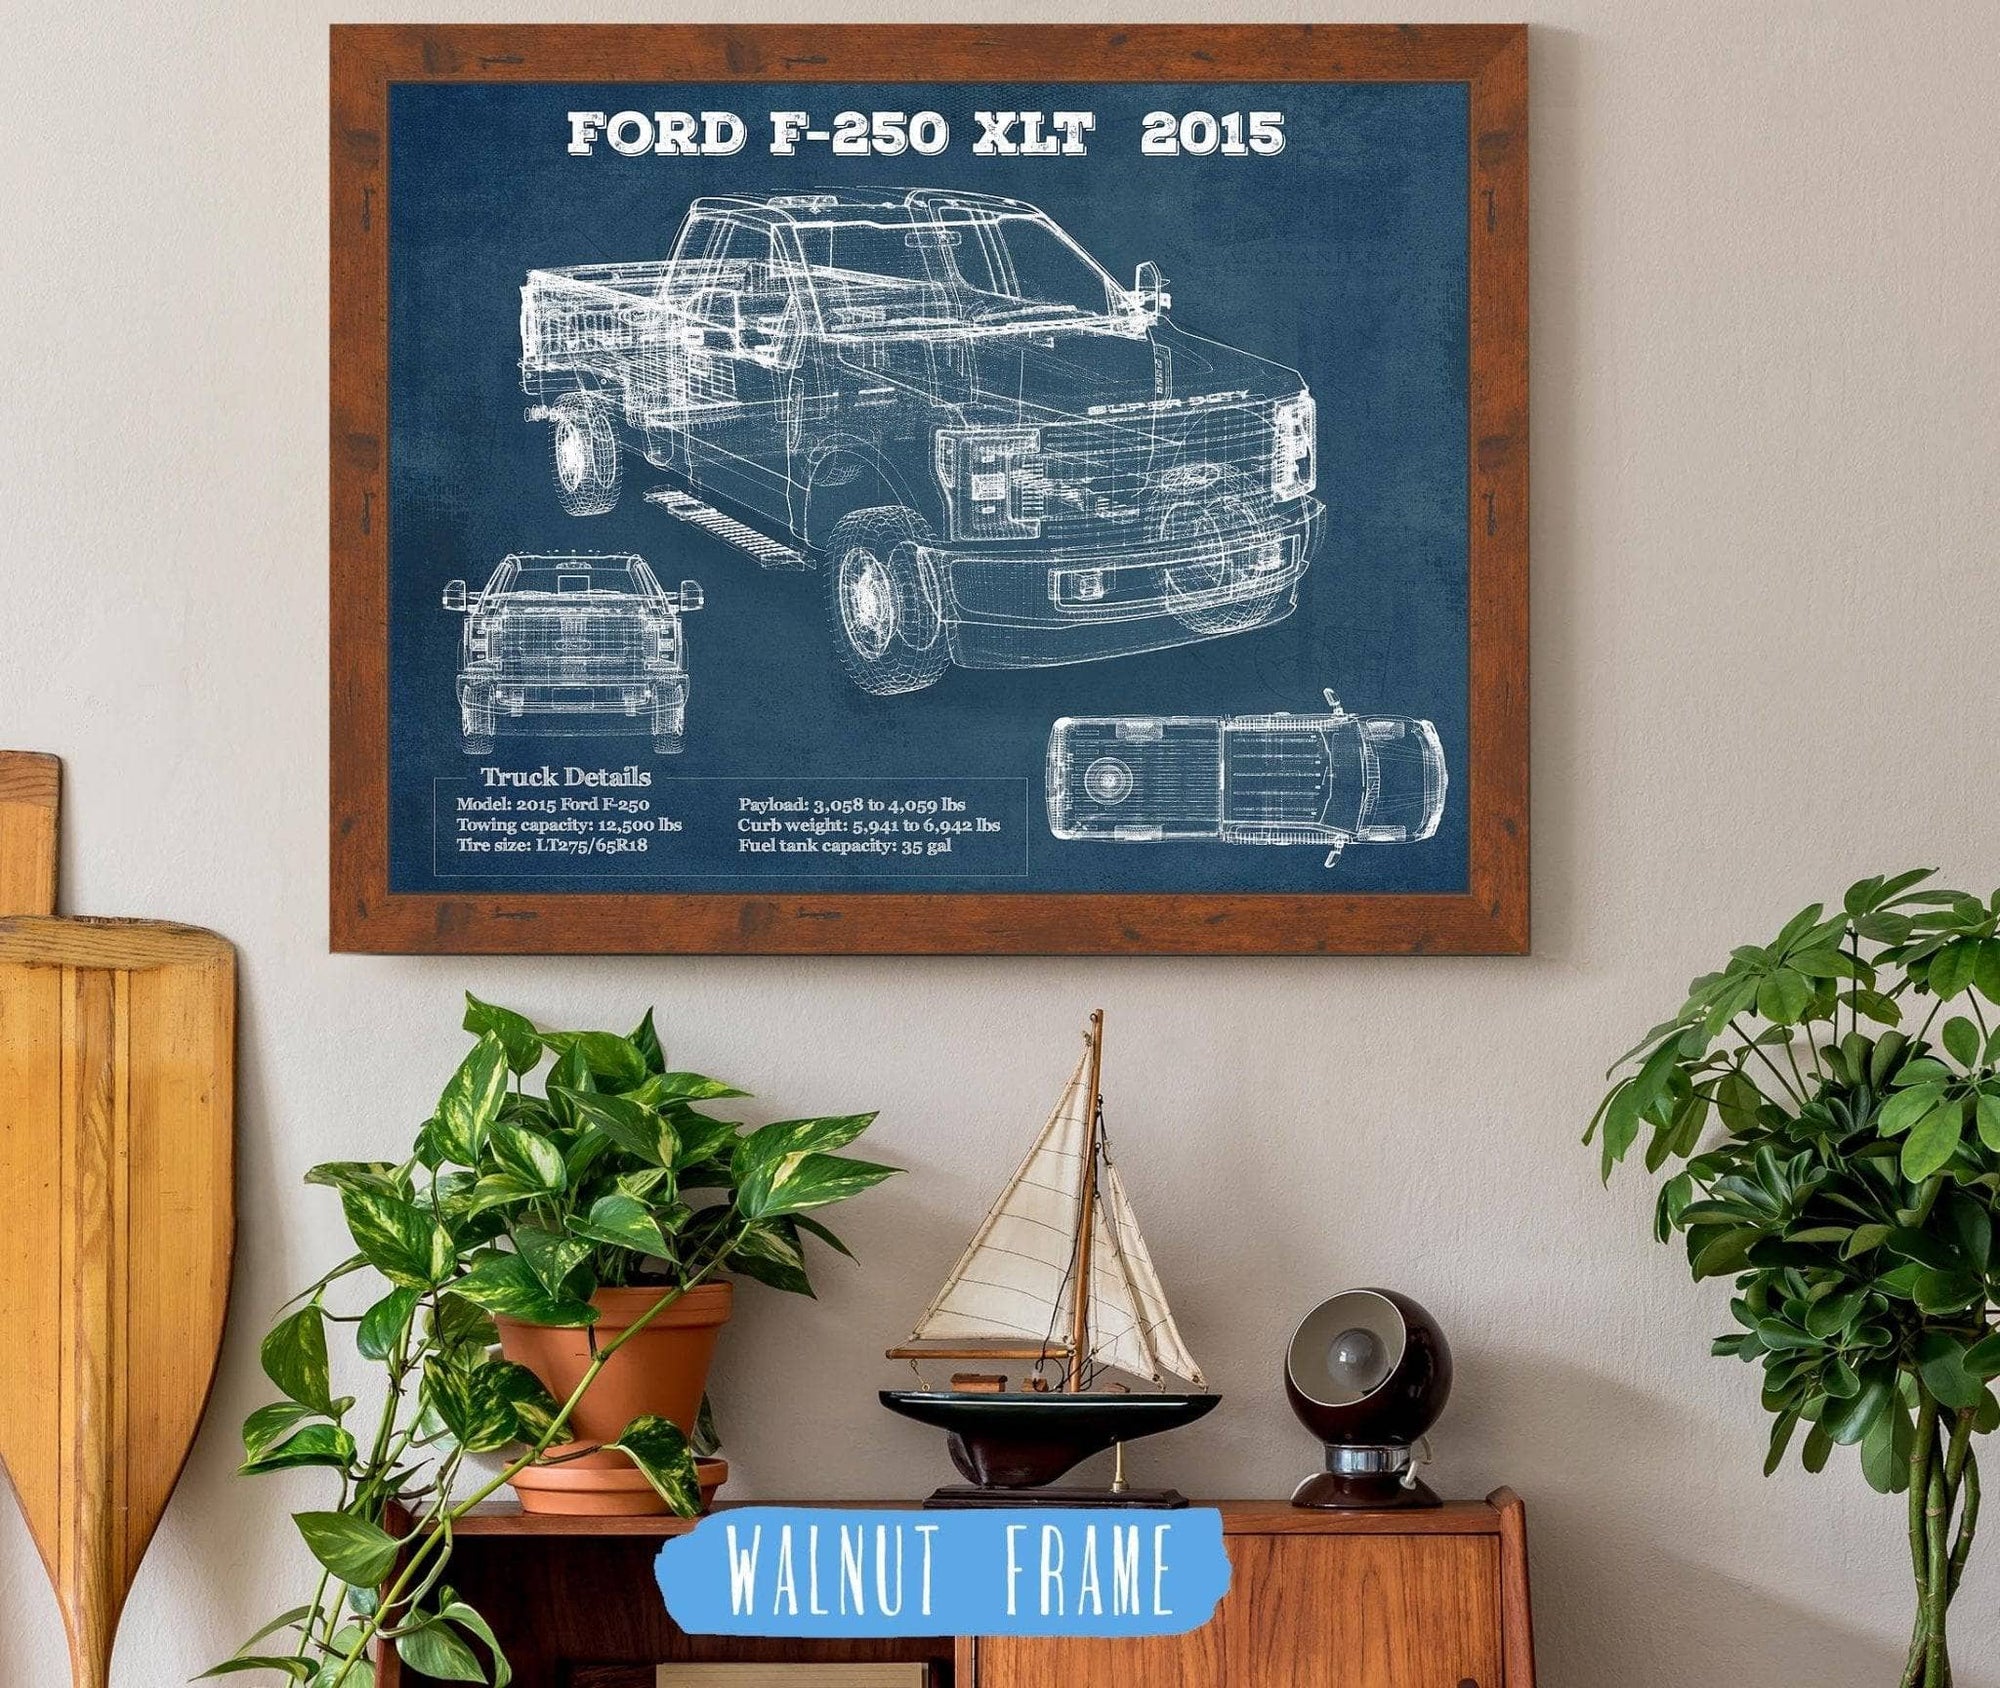 Cutler West Ford Collection 14" x 11" / Walnut Frame Ford F-250 XLT (2015) Vintage Blueprint Auto Print 845000170_59828